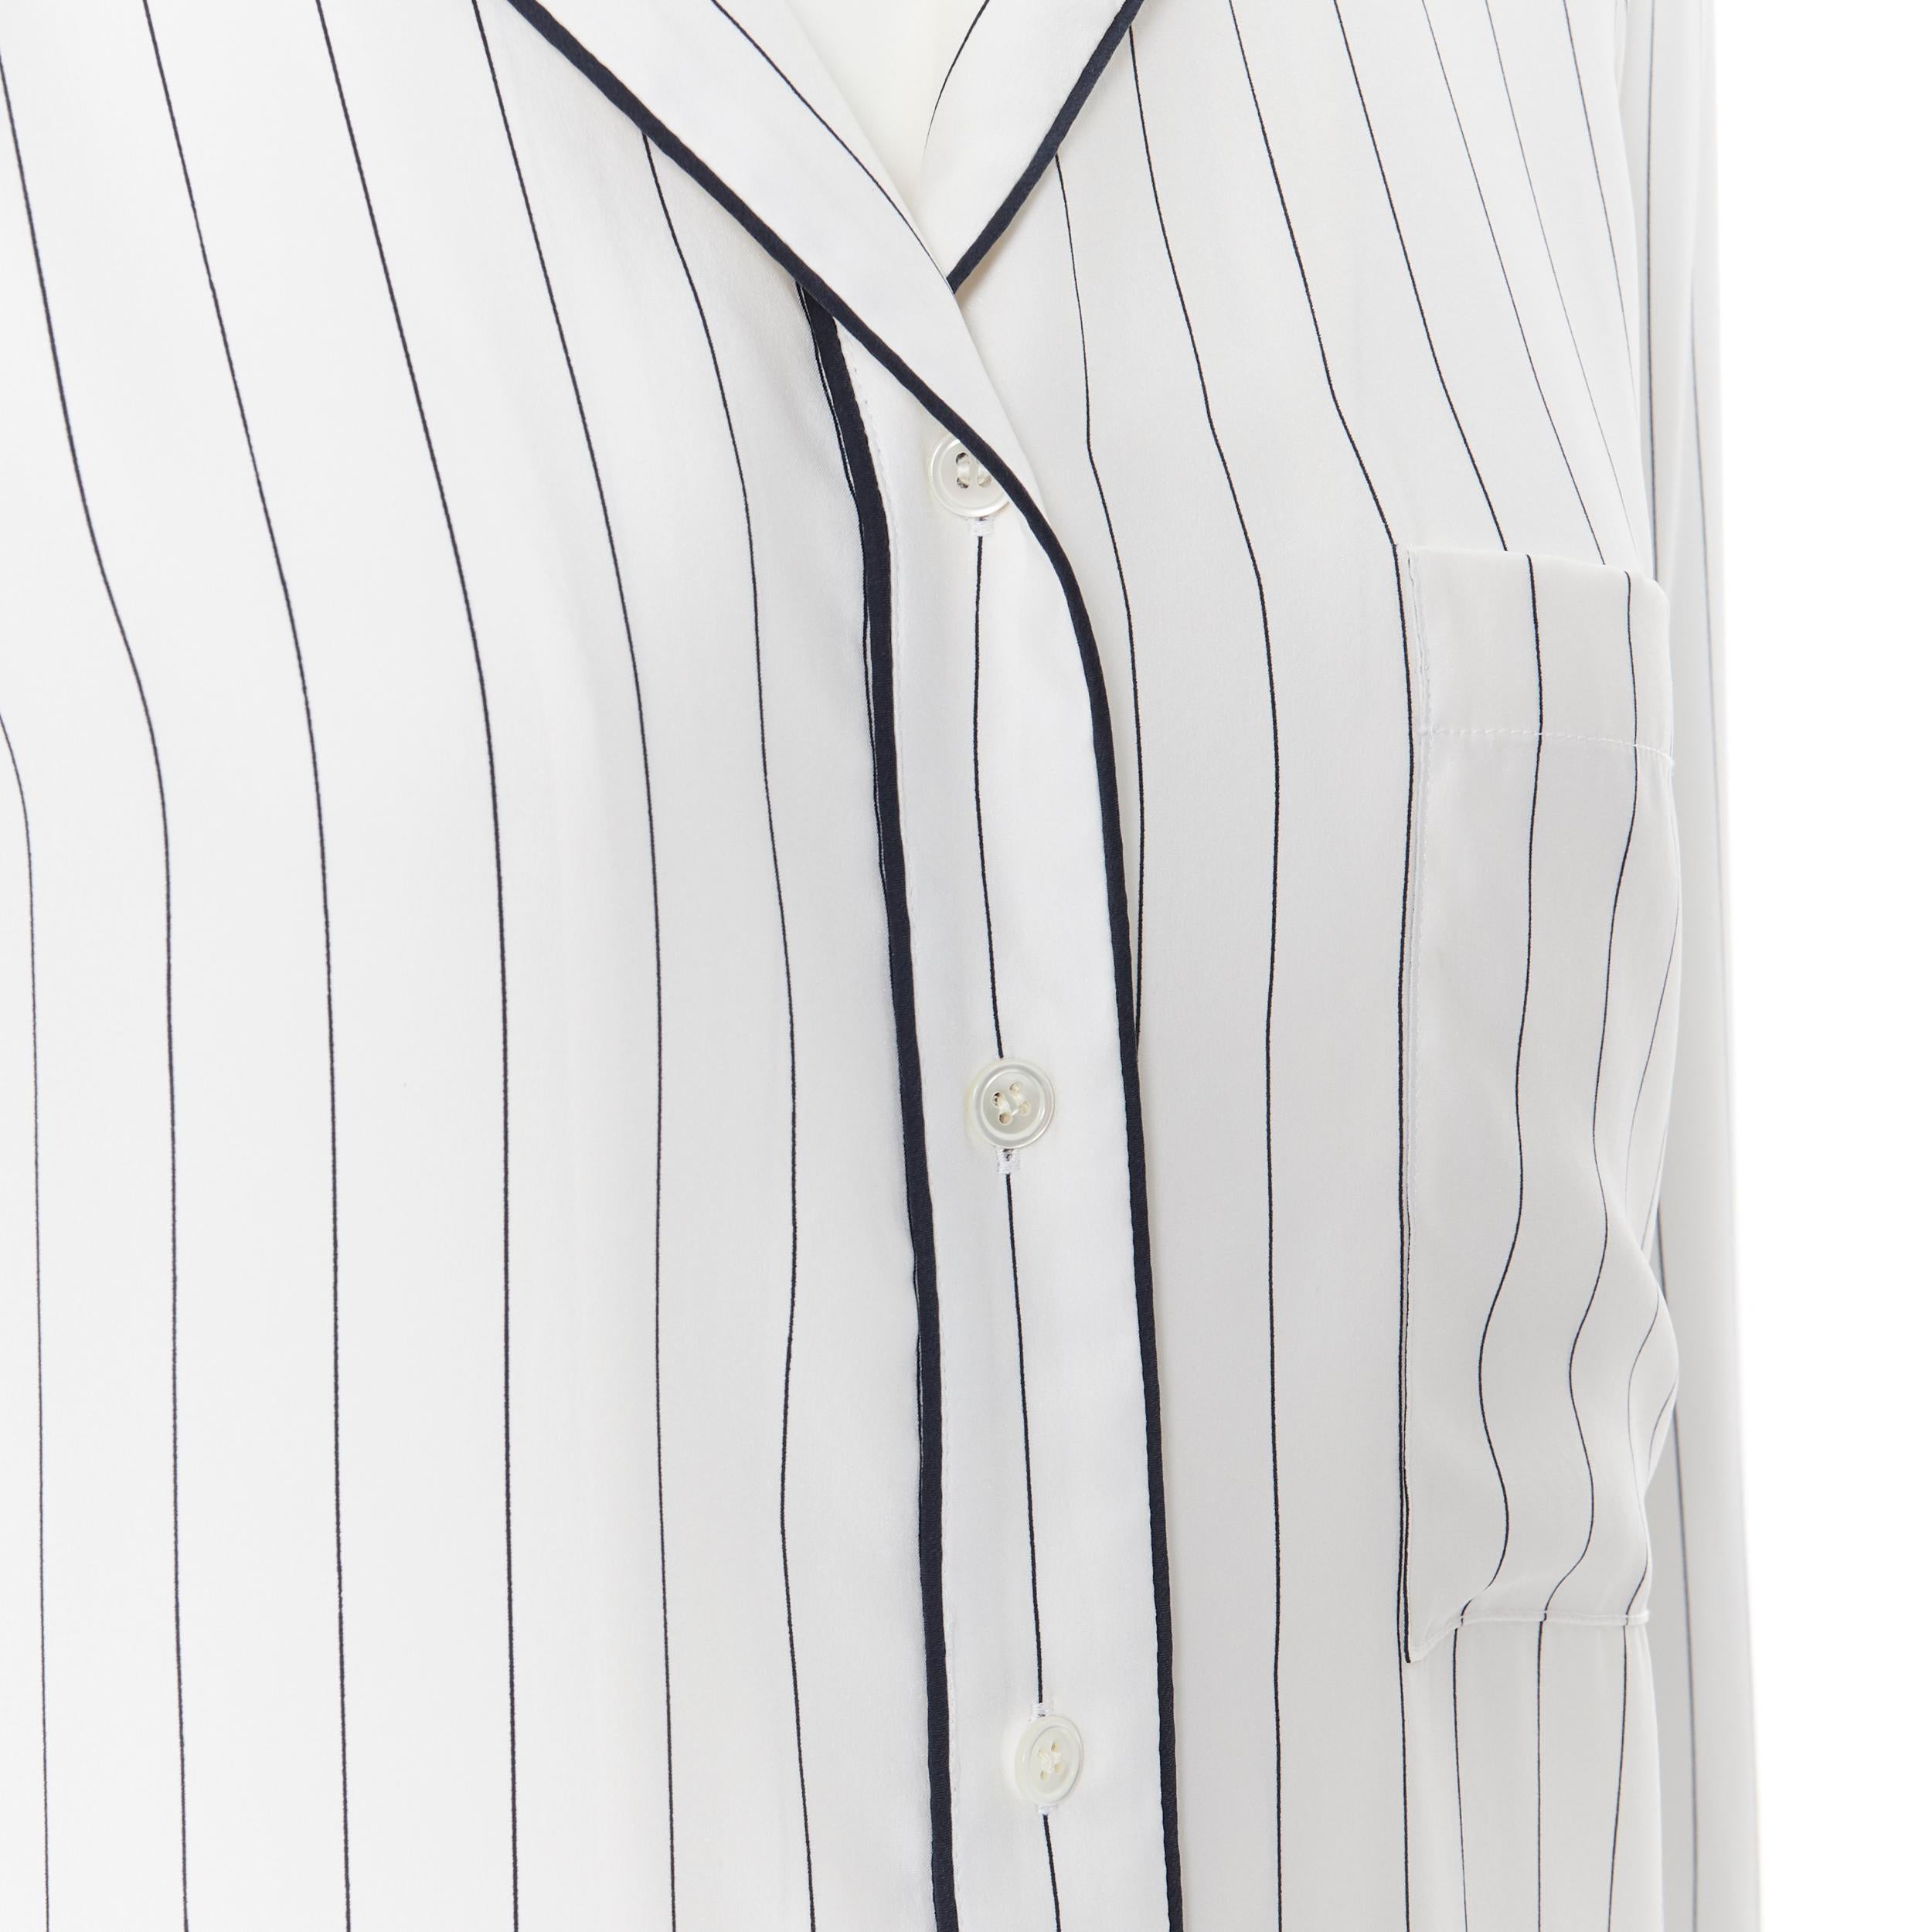 FRAME 100% silk white black vertical stripe black piping casual pyjama shirt XS
Brand: Frame
Model Name / Style: Silk shirt
Material: Silk
Color: White
Pattern: Striped
Extra Detail: 100% silk. Black piping. Button front closure. Long Sleeve.